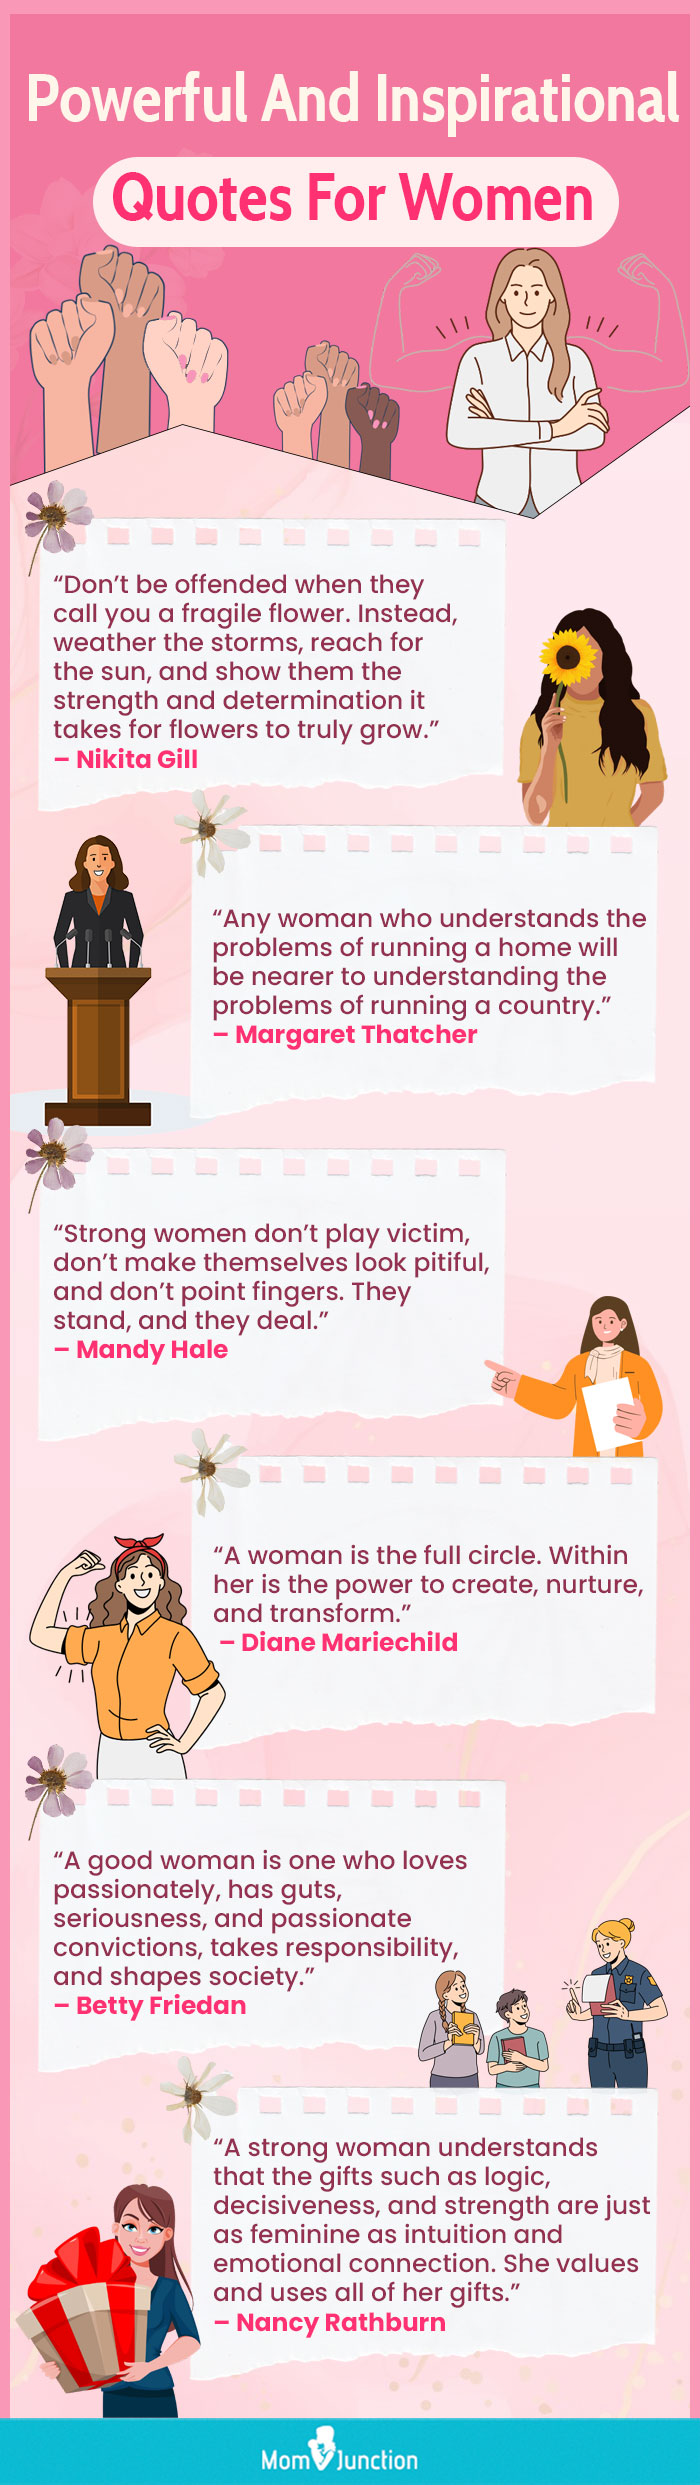 Women Empowerment Quotes To Inspire You [Powerful]